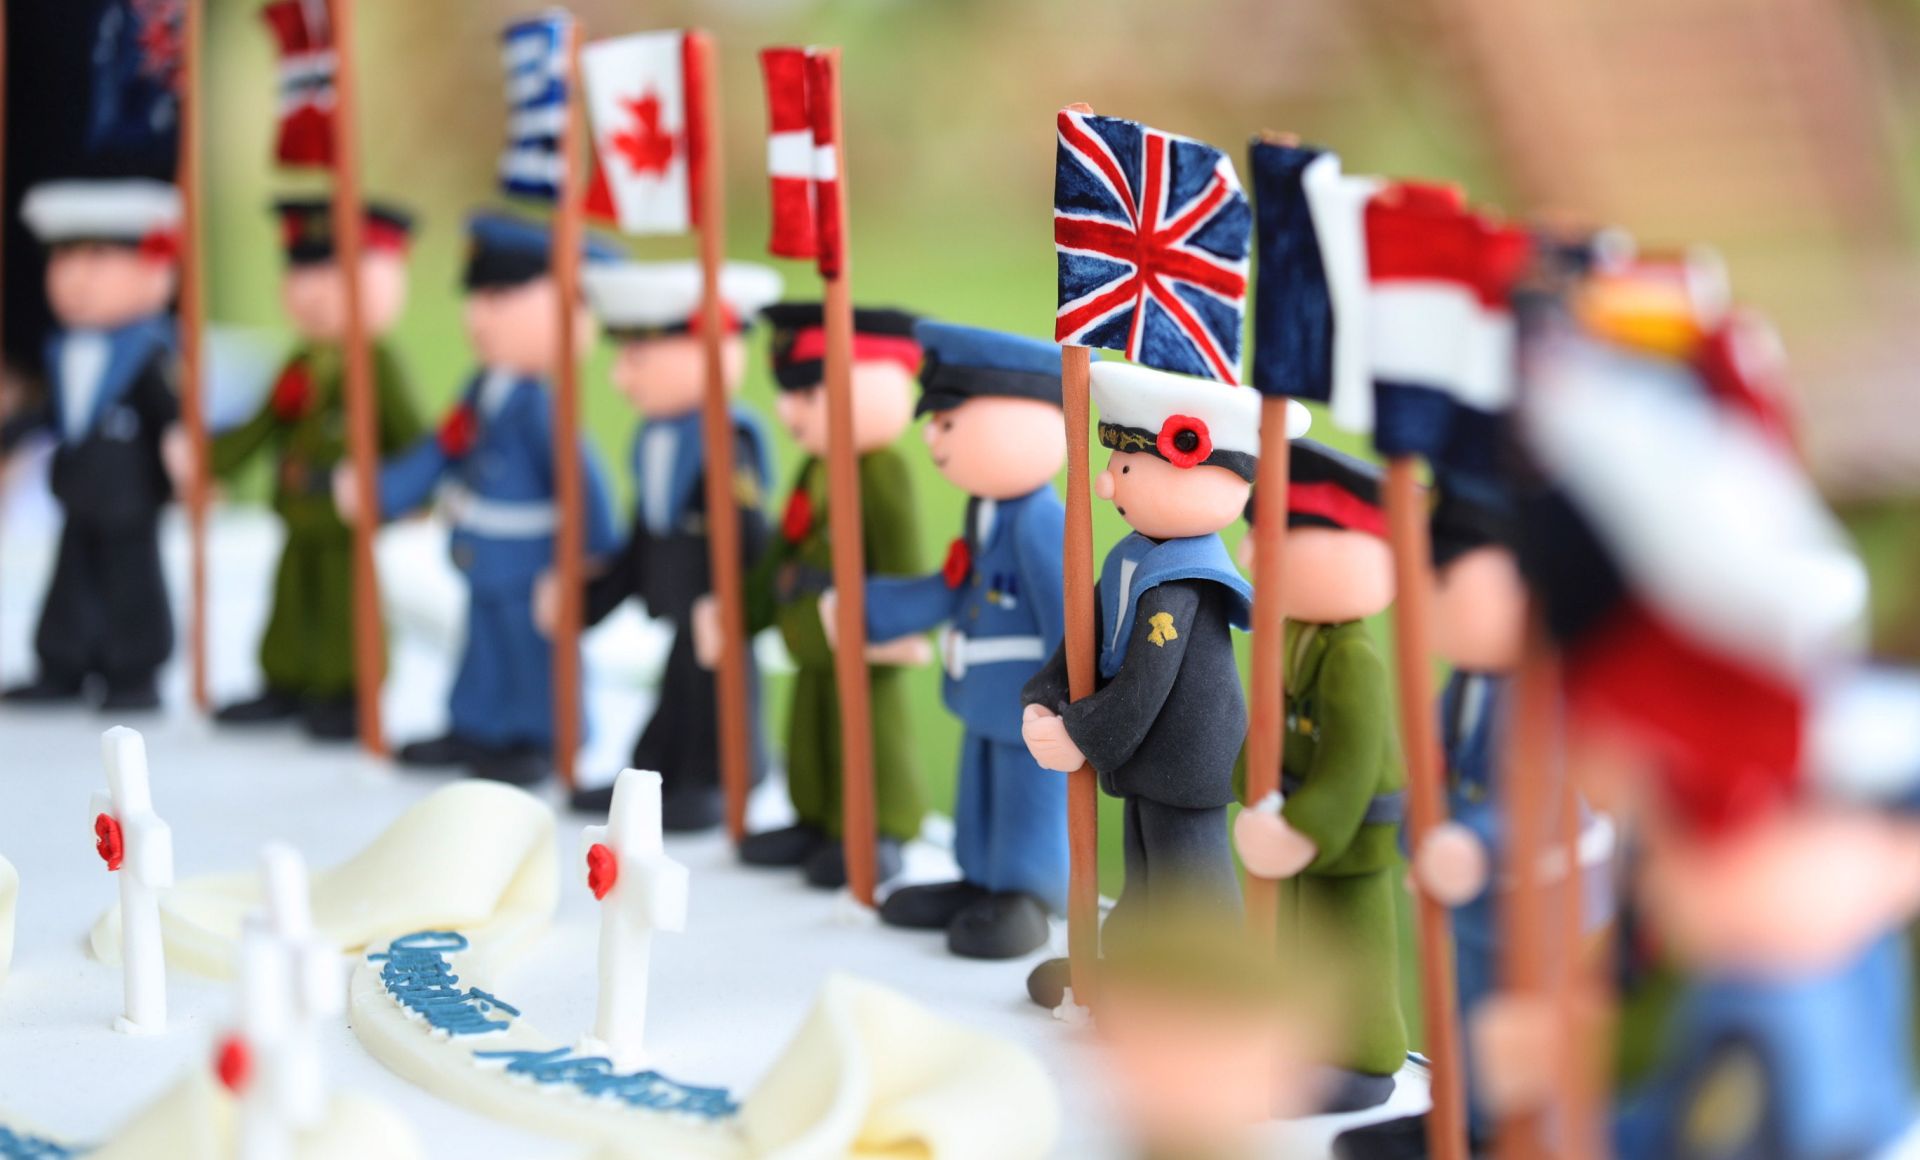 epa07627858 A handout picture provided by the British Ministry of Defence showing a D Day 75 commemorative cake, on display at the commemorations for the 75th Anniversary of the D-Day landings in Southsea Common, Portsmouth, Hampshire, Britain, 05 June 2019. Britain's Queen Elizabeth II will join US President Donald J. Trump and other World leaders from nations that fought alongside Britain to mark the 75th anniversary of the World's largest seaborne military invasion which was assembed in ports in southern England on 05 June 1944 and set off for the coast of Normany, France on 06 June 1944. World leaders are to attend memorial events in Normandy, France on 06 June 2019 to mark the 75th anniversary of the D-Day landings, which marked the beginning of the end of World War II in Europe.  EPA/OWEN COOBAN / BRITISH MINISTRY OF DEFENCE/HANDOUT MANDATORY CREDIT: MOD /CROWN COPYRIGHT HANDOUT HANDOUT EDITORIAL USE ONLY/NO SALES